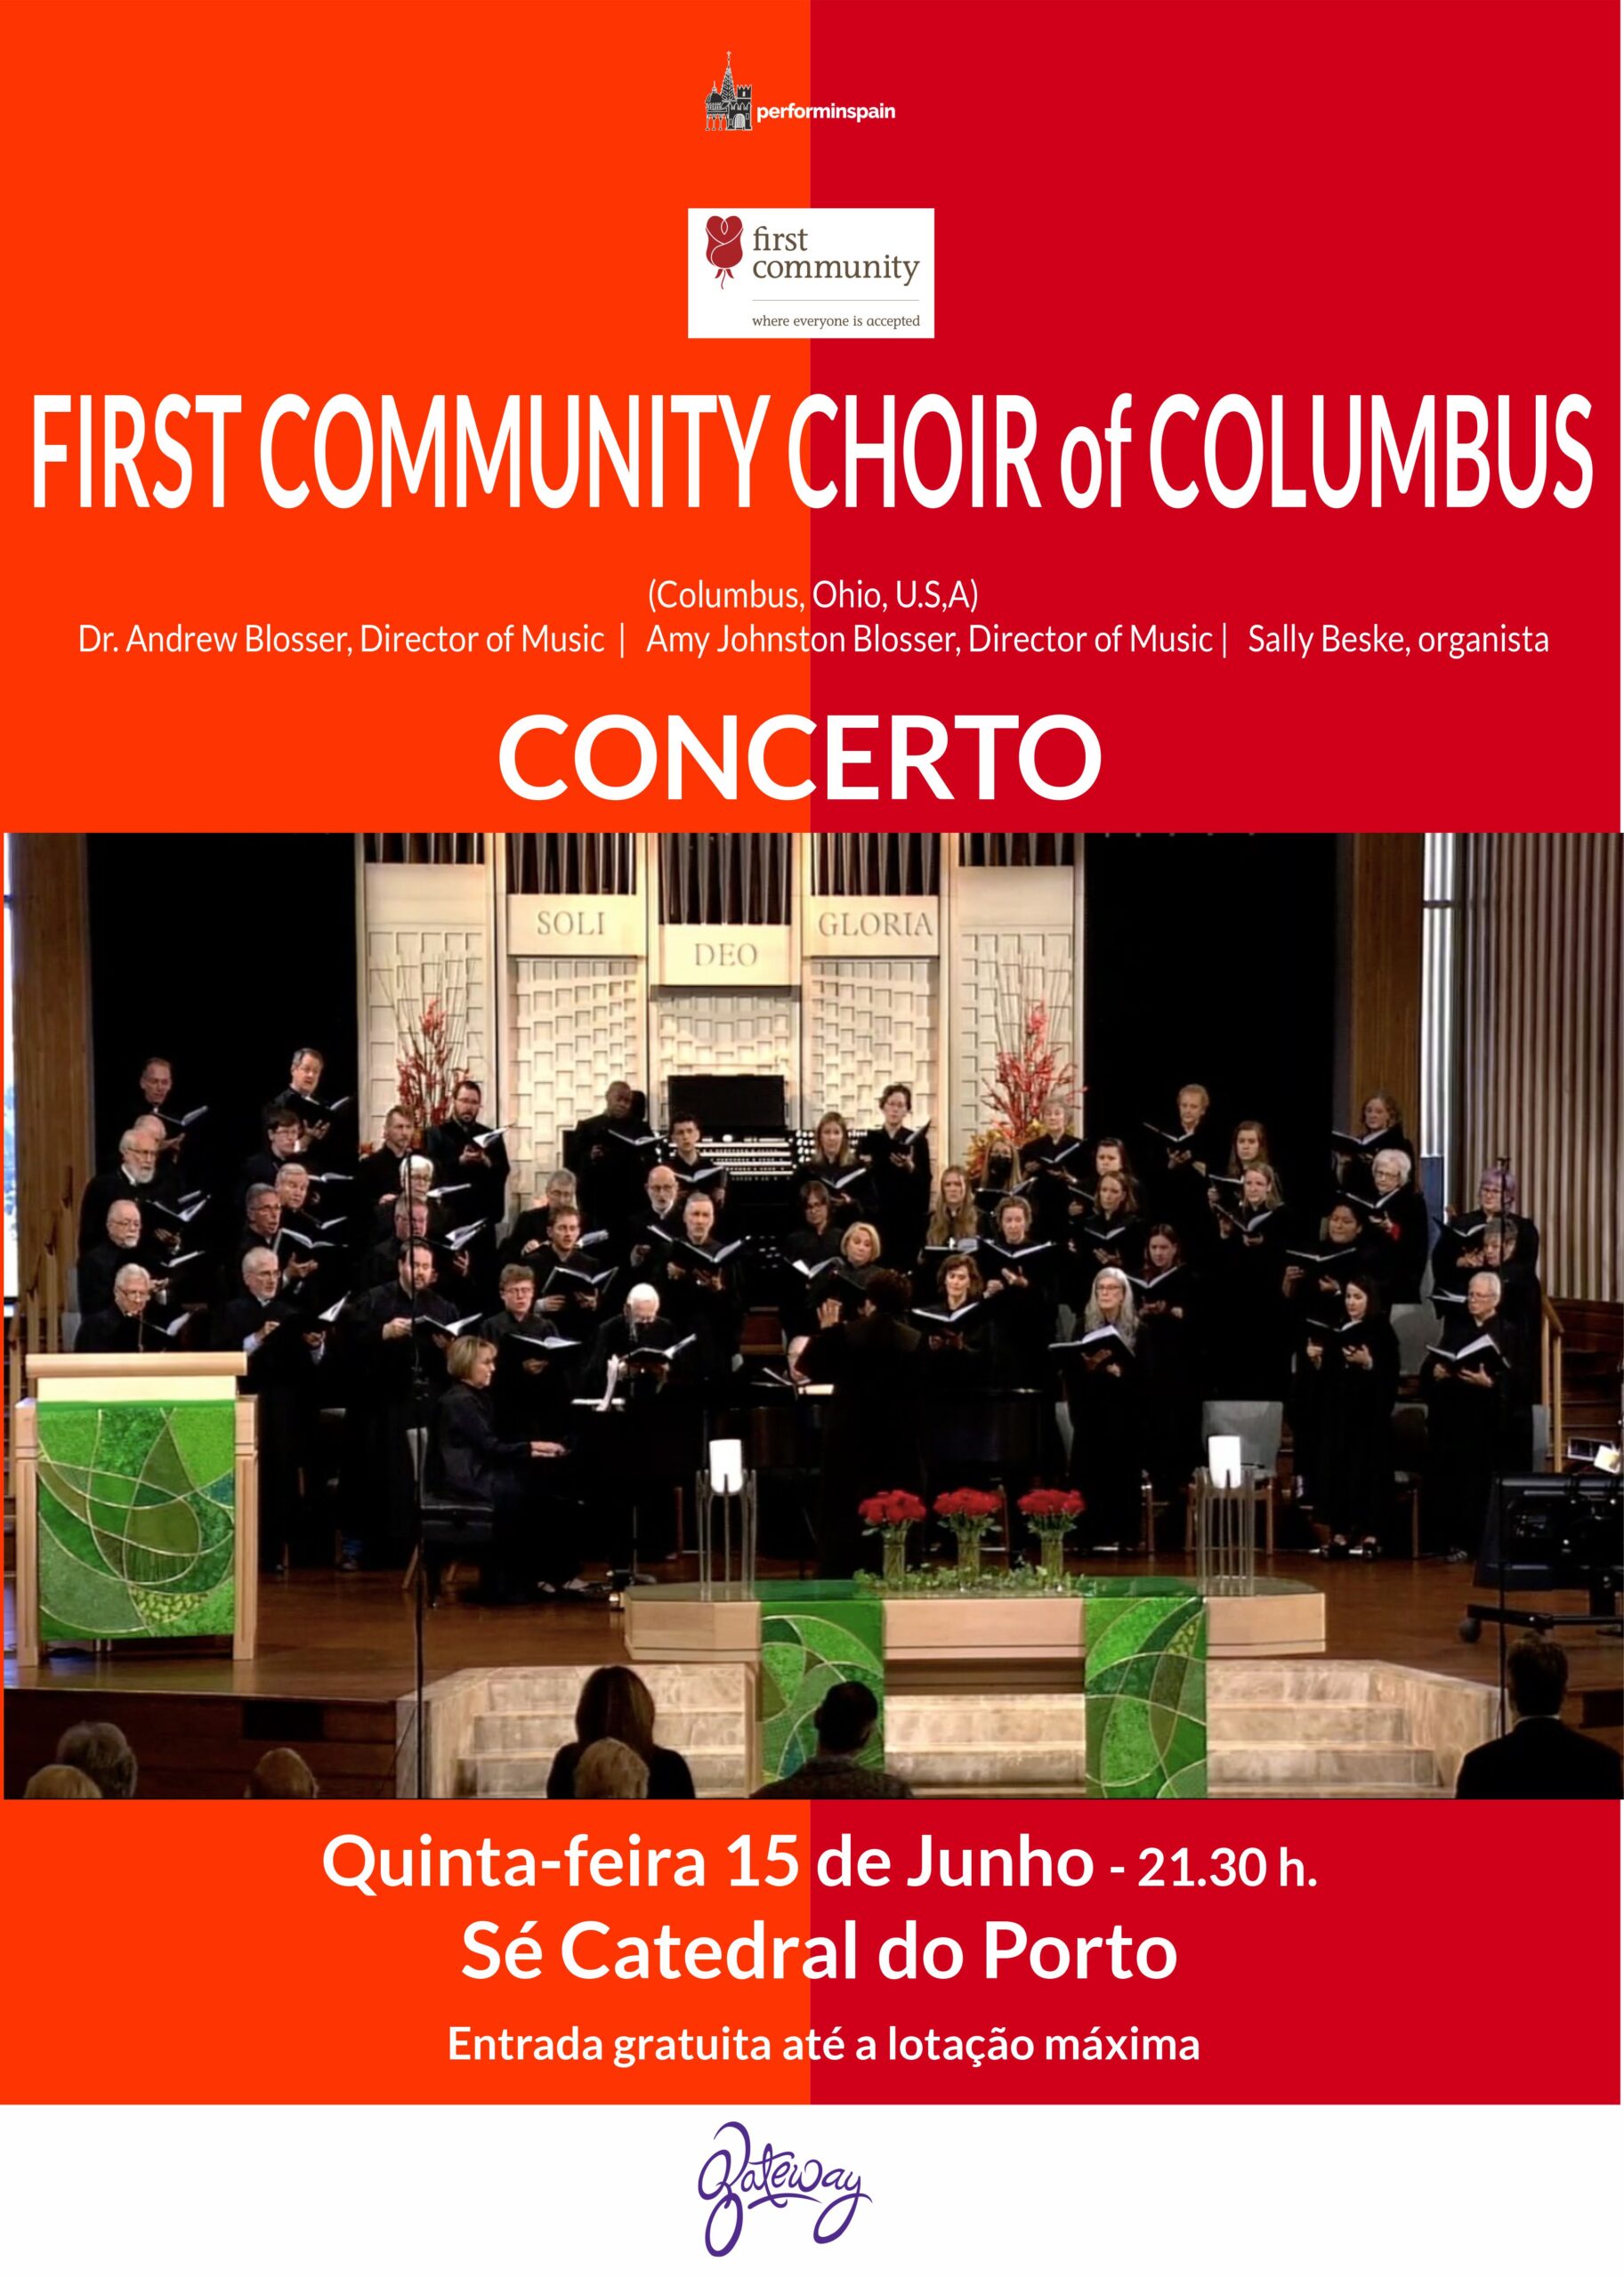 Concerto do First Community Choir of Colombus